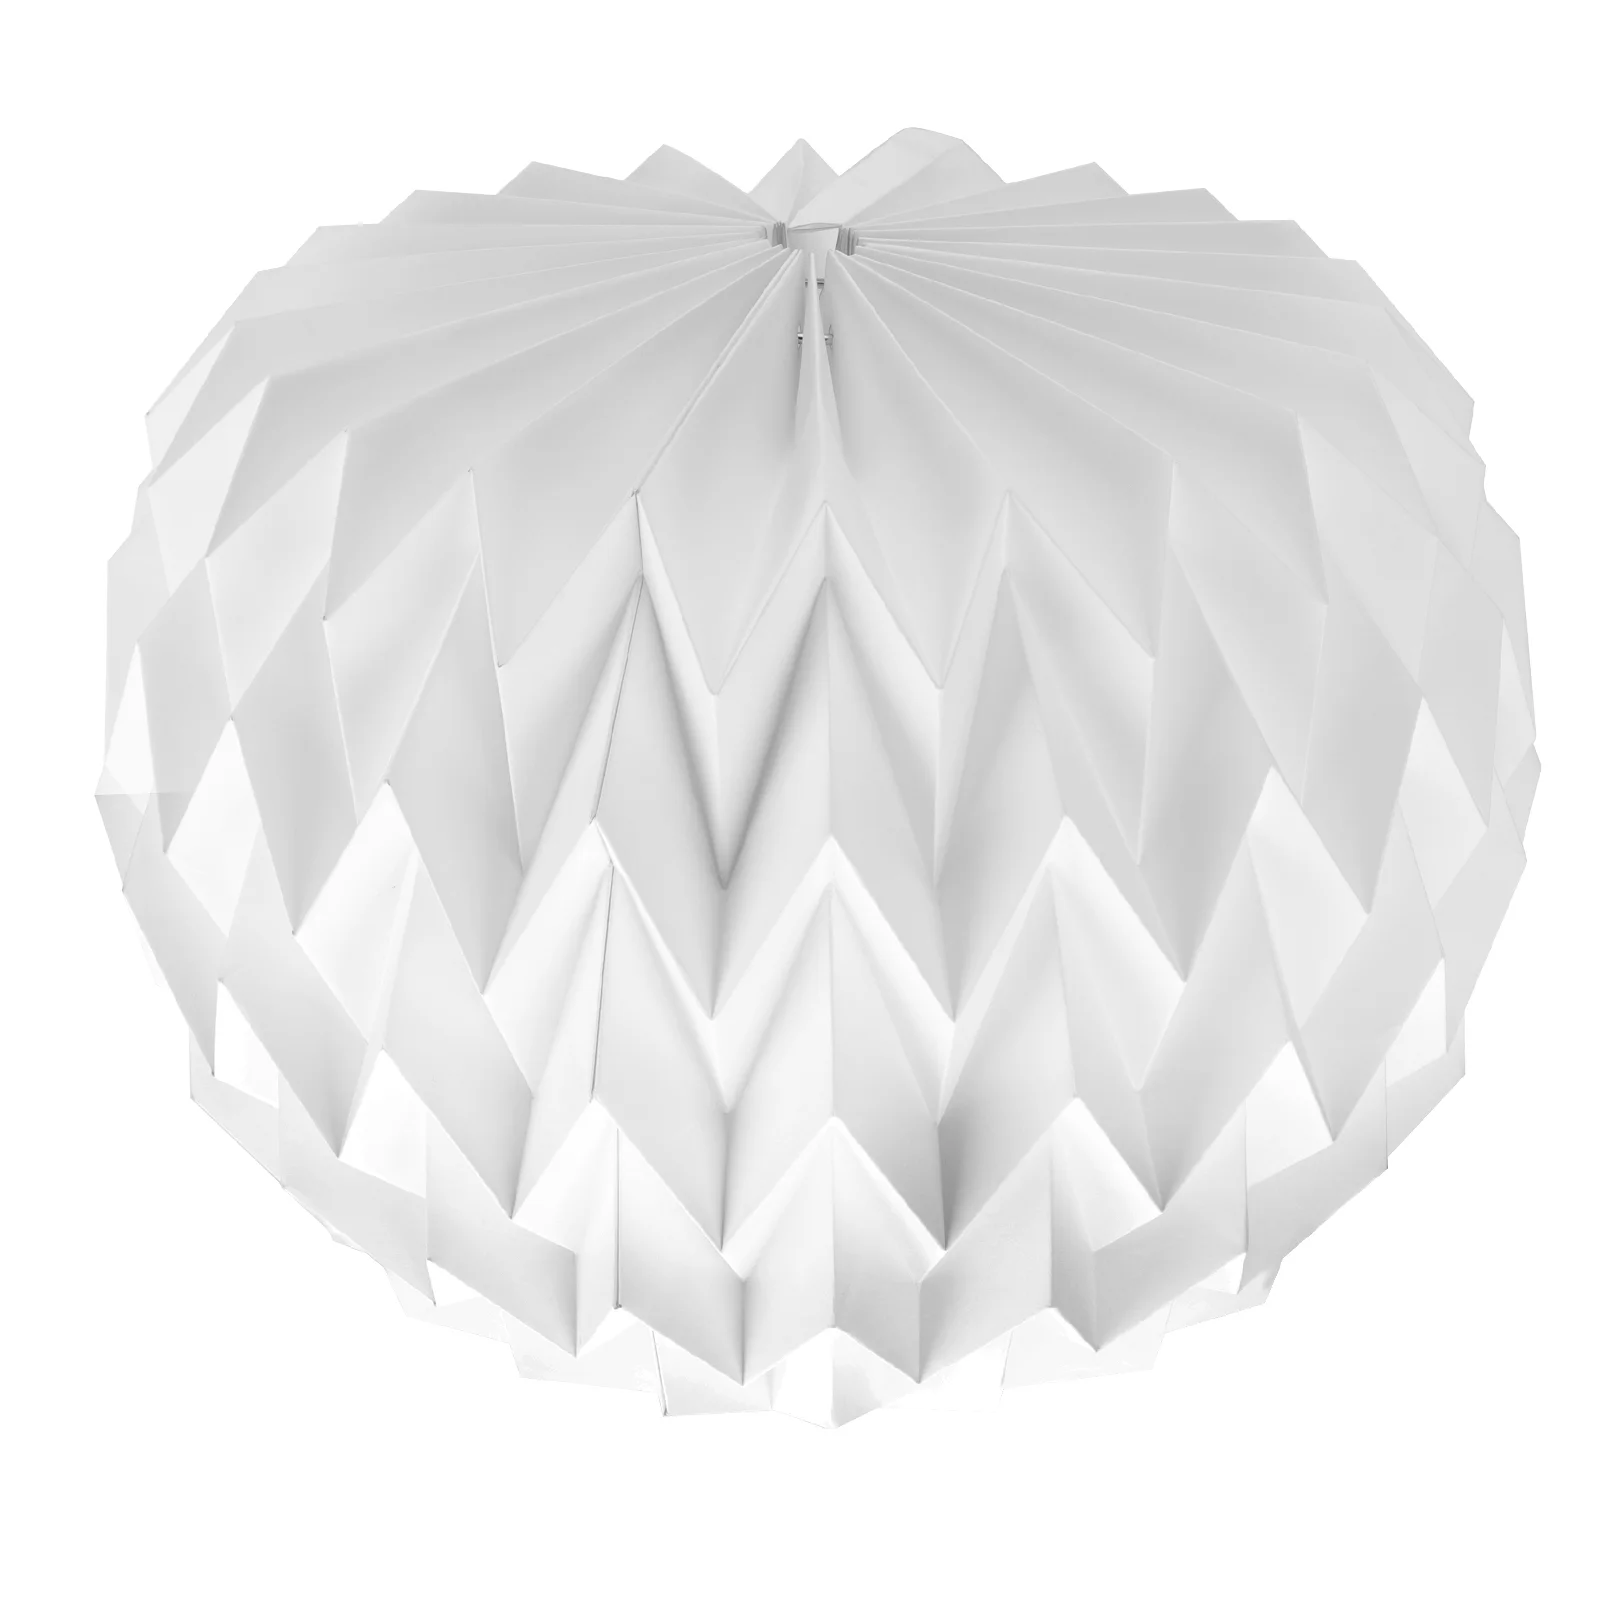 

Paper Shade Lamp Lampshade Light Tabletop Table Floor Cover Ceiling Hanging Origami Modern Folding Shades Chandelier Replacement